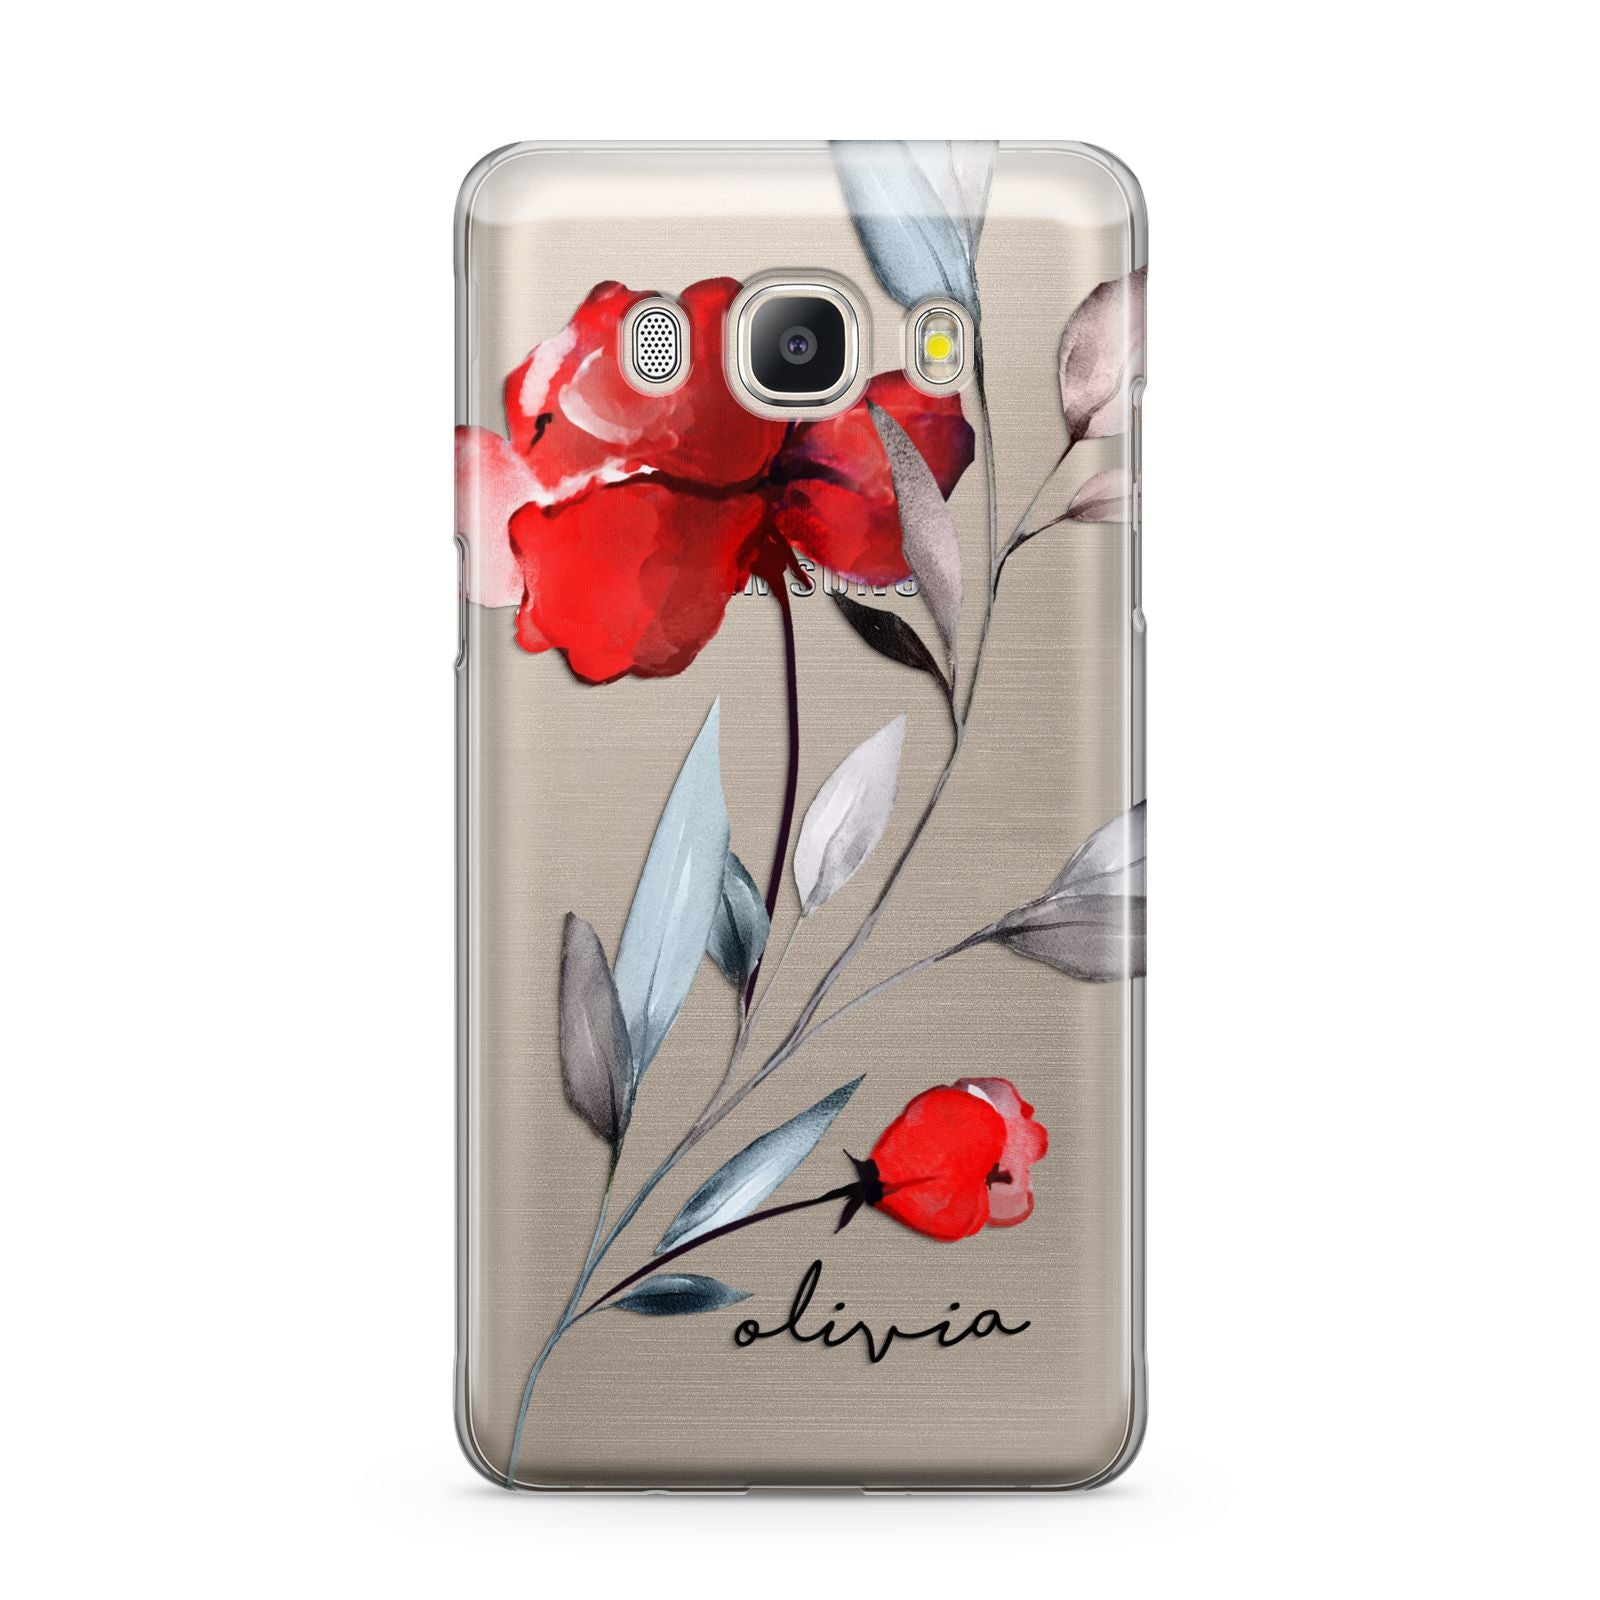 Personalised Red Roses Floral Name Samsung Galaxy J5 2016 Case